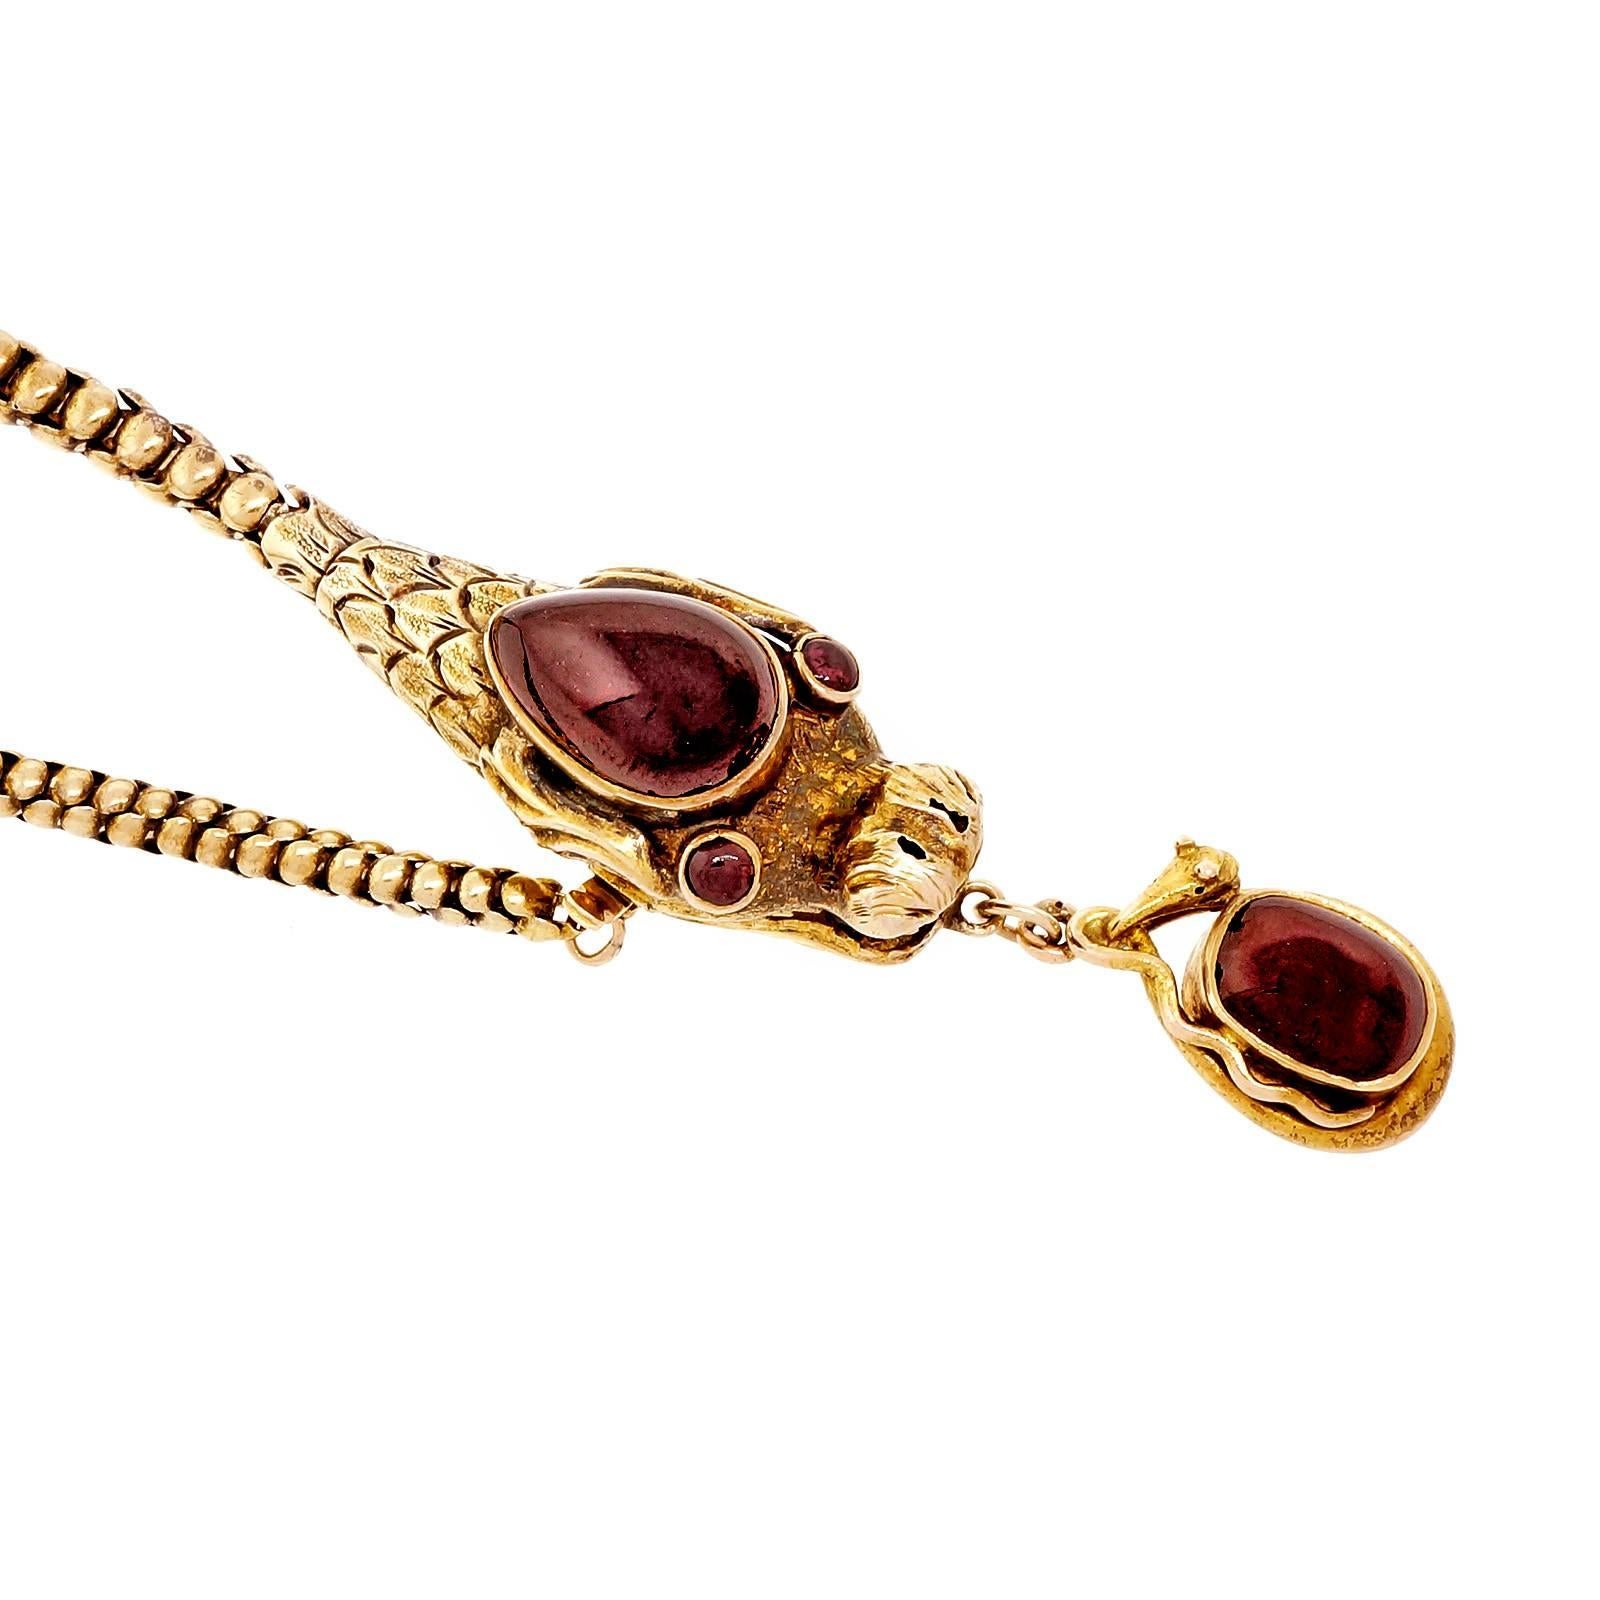 Victorian handmade dragon or serpent necklace circa 1880-1889 with cabochon Garnets. A second serpent piece dangles from the mouth.

1 pear reddish brown Garnet, 14.73 x 9.50mm
2 round cabochon Garnets, 2.54mm
1 oval cabochon Garnet, 4.94 x